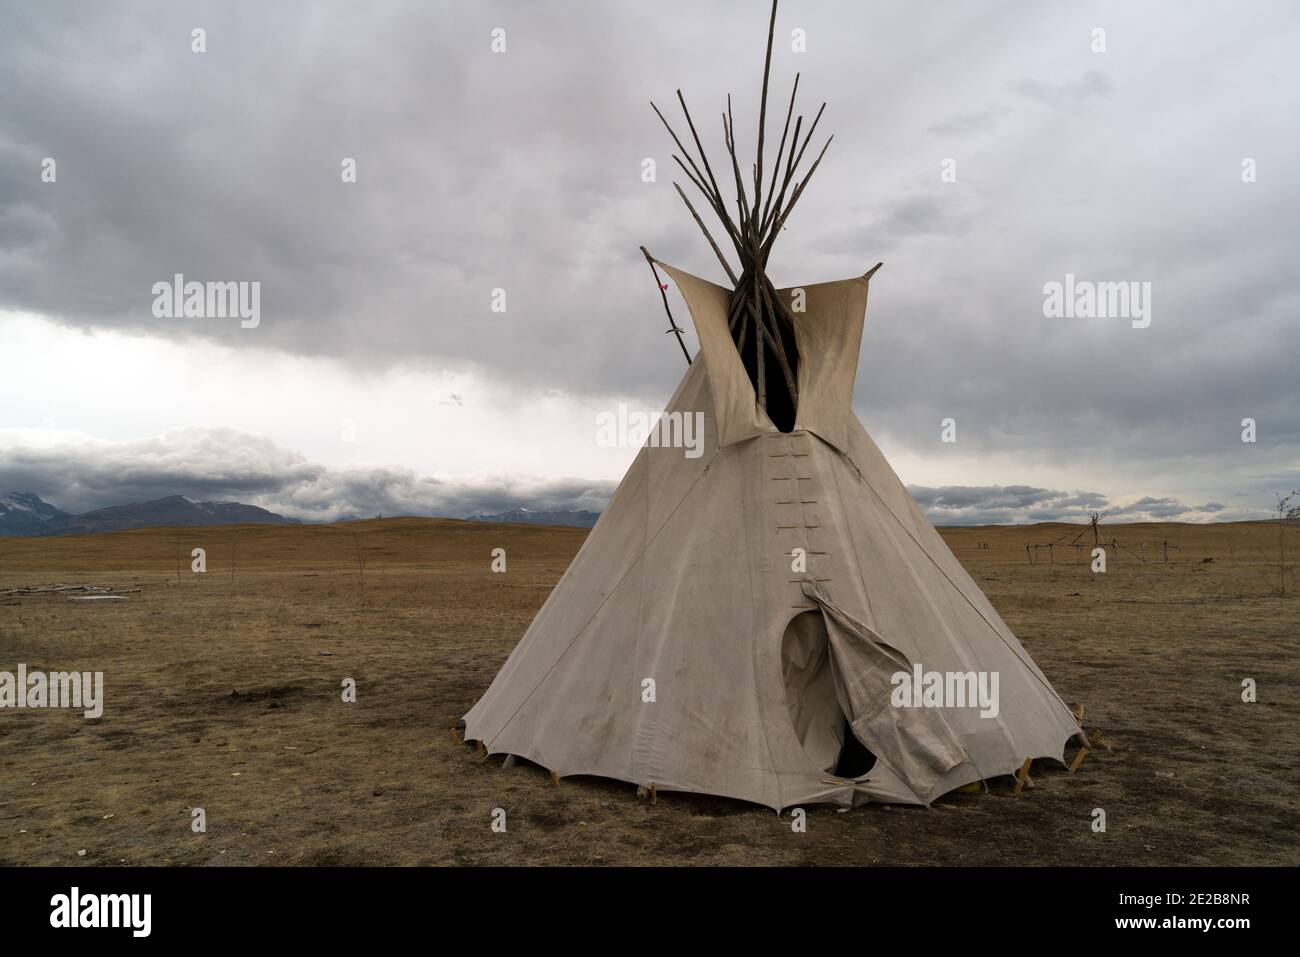 Teepee in a field on a cloudy day Stock Photo